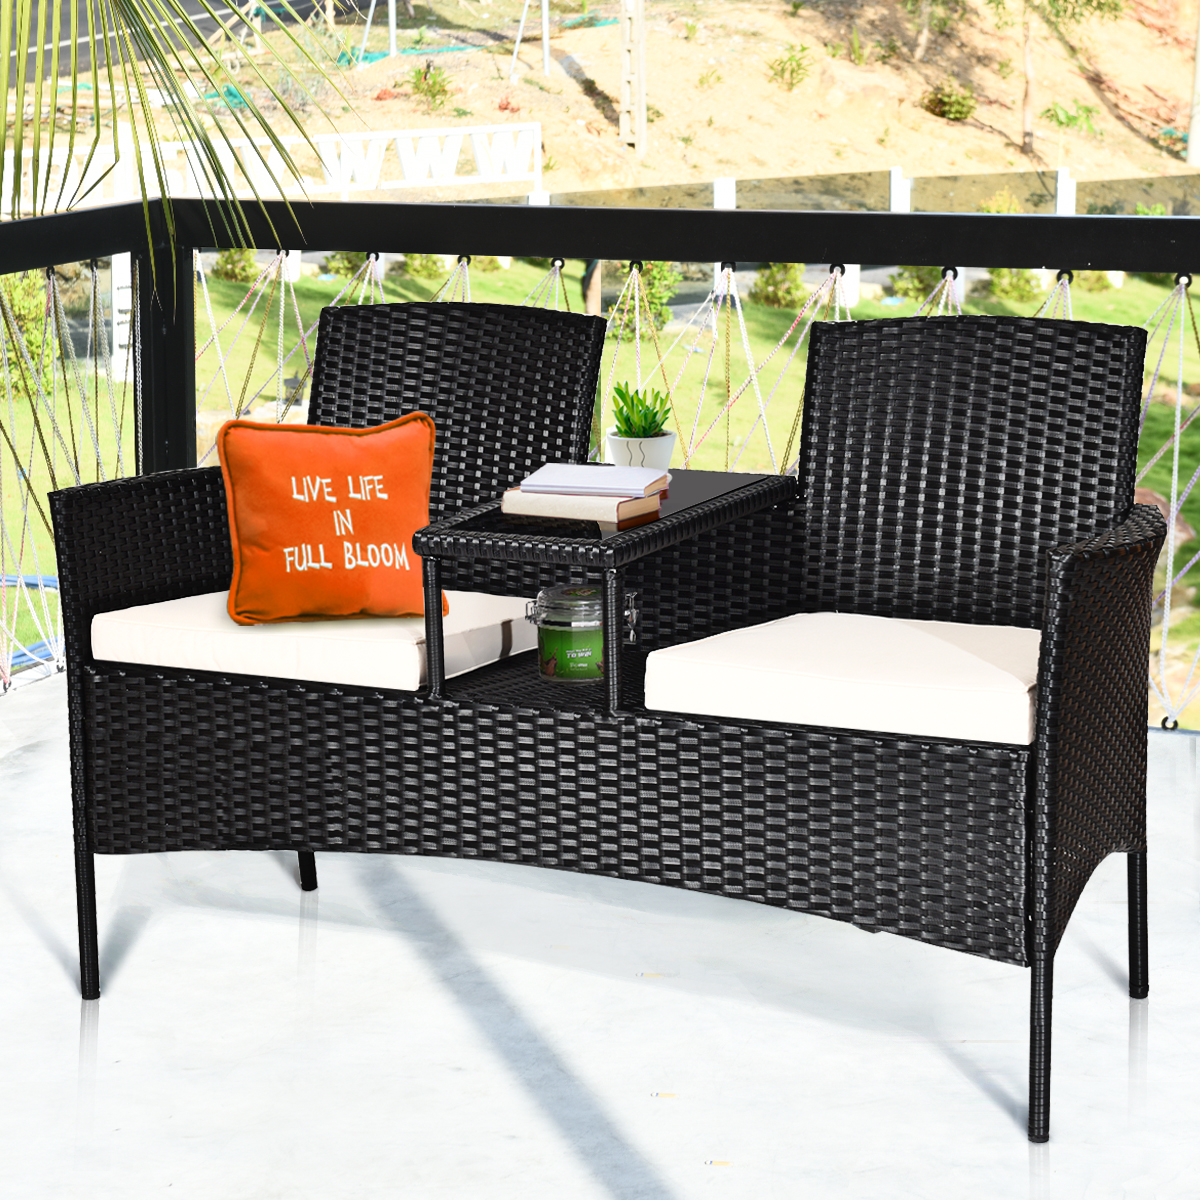 Costway Patio Rattan Conversation Set Seat Sofa Cushioned Loveseat Glass Table Chairs - image 1 of 8